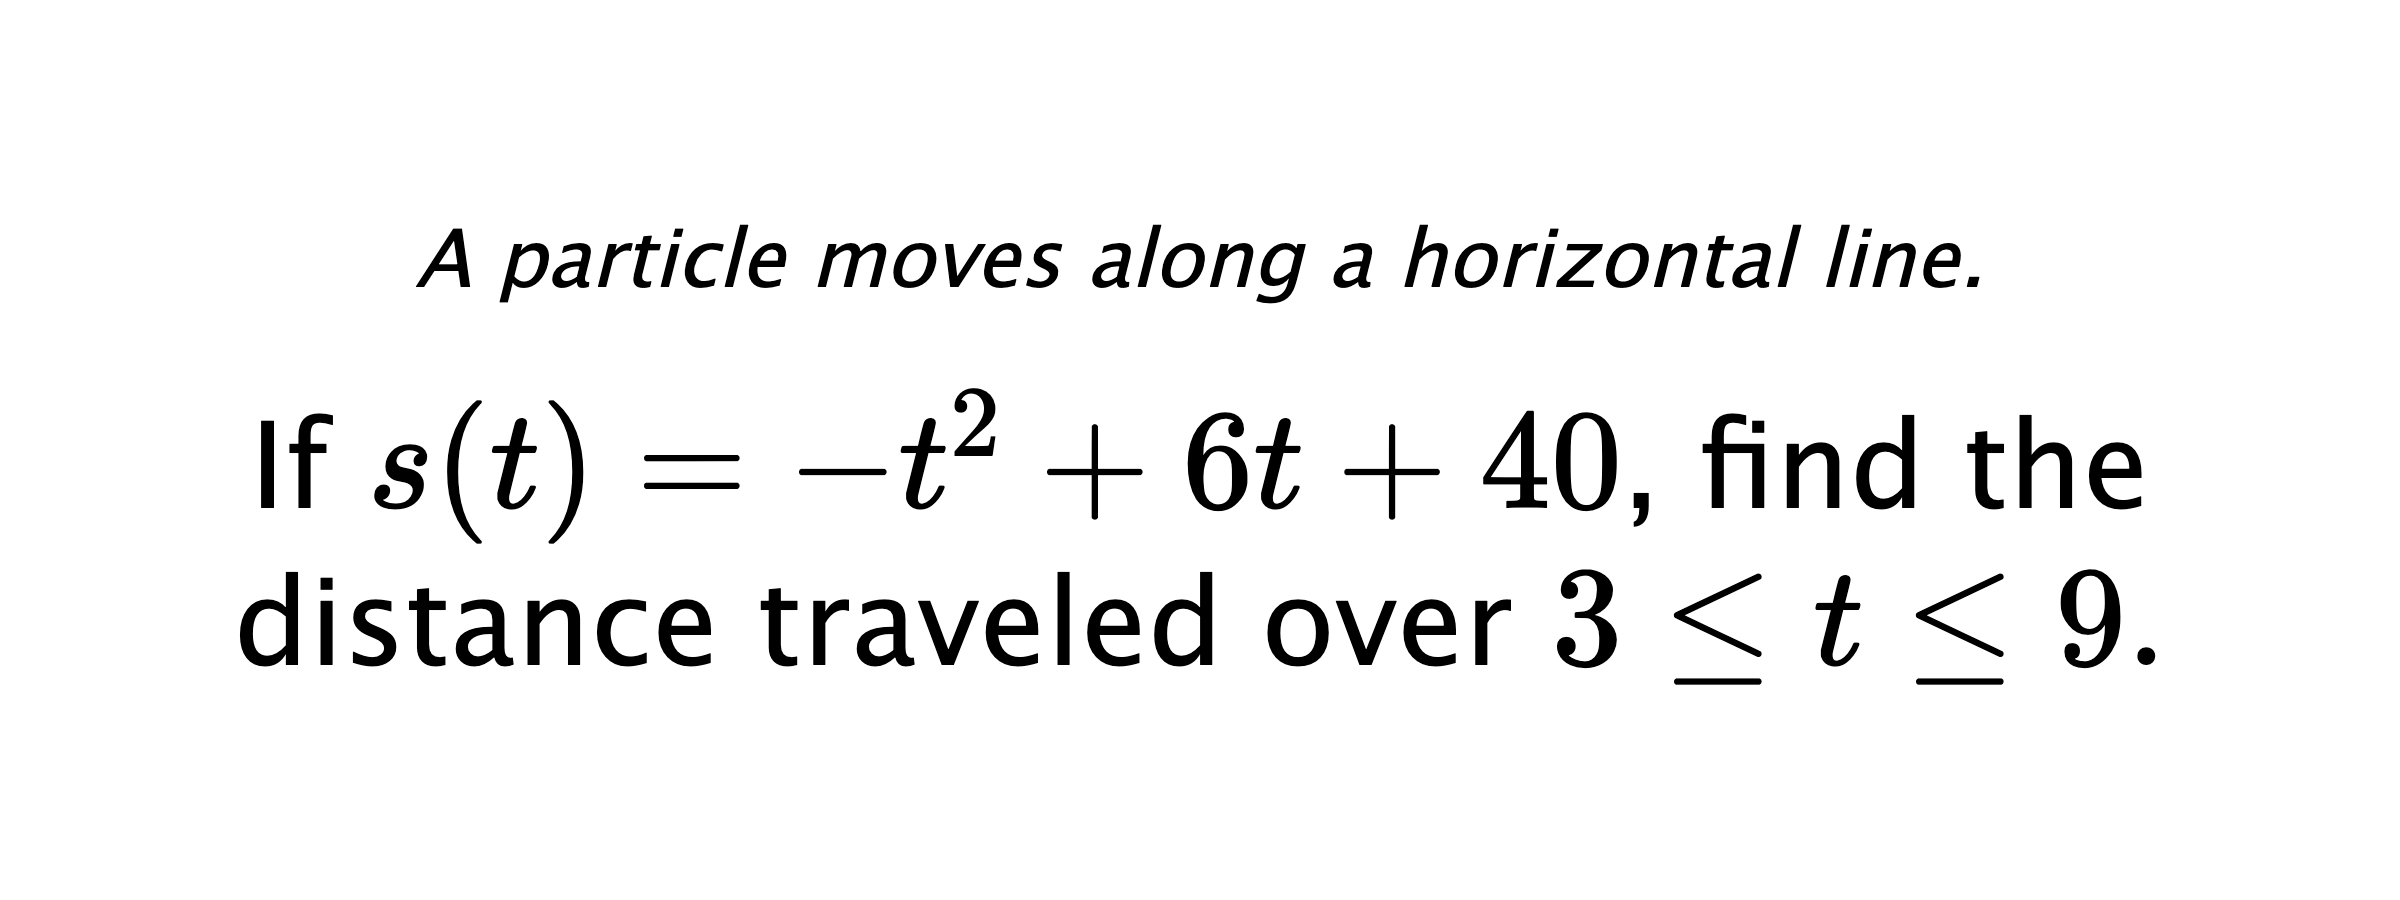 A particle moves along a horizontal line. If $ s(t)=-t^2+6t+40 $, find the distance traveled over $ 3 \leq t \leq 9. $